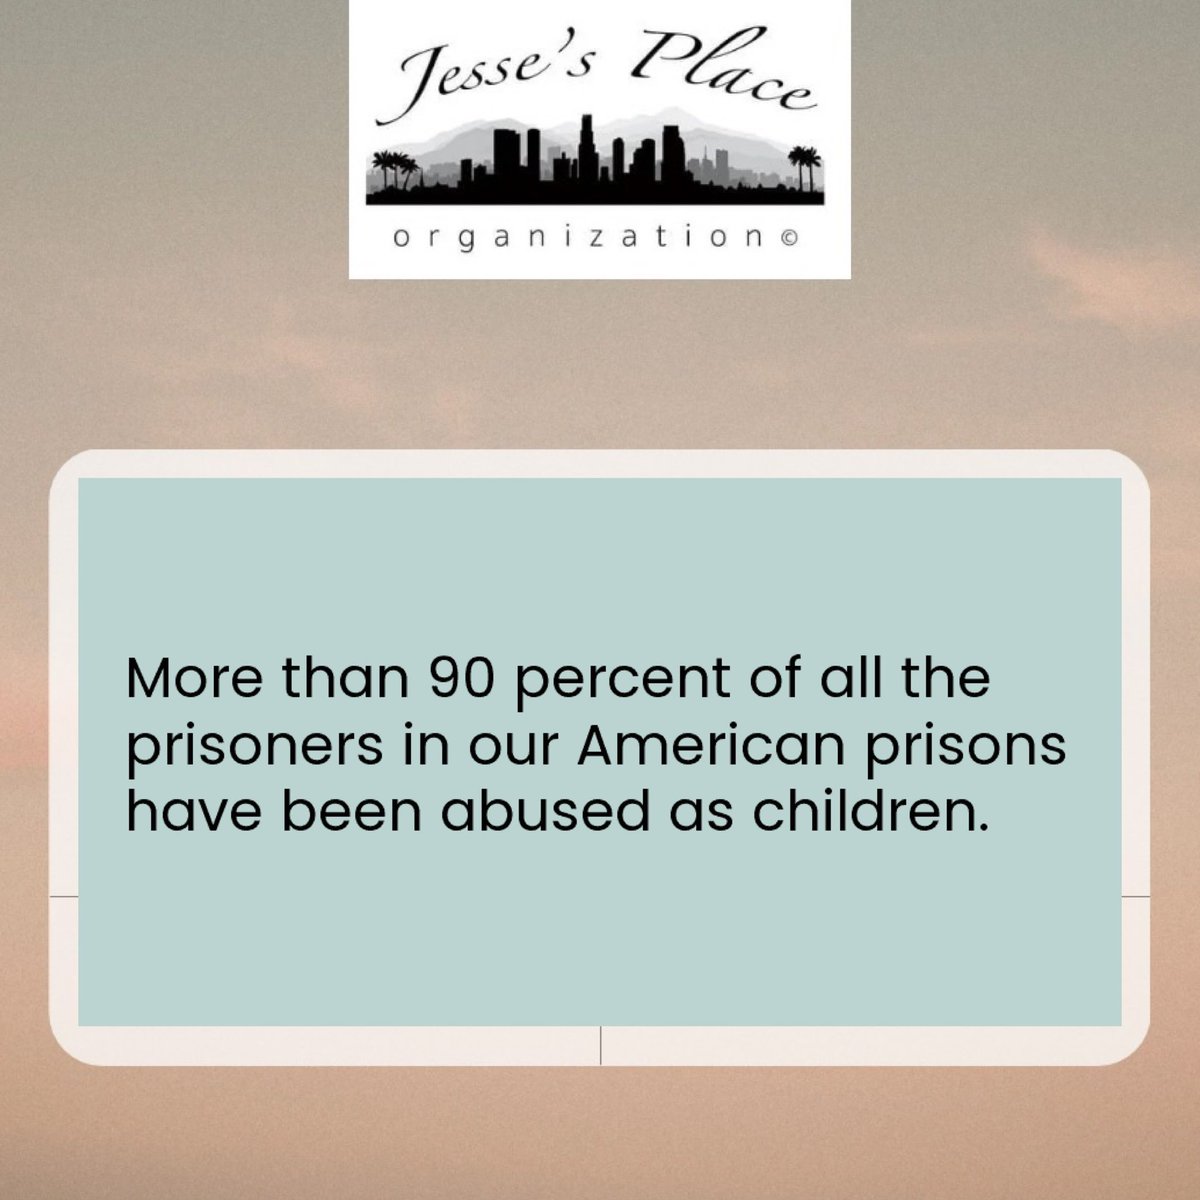 Something to reflect on: 💡

“More than 90 percent of all the prisoners in our American prisons have been abused as children.” 

#HurtPeopleHurtPeople #EndMassIncarceration #PeopleOverProfit